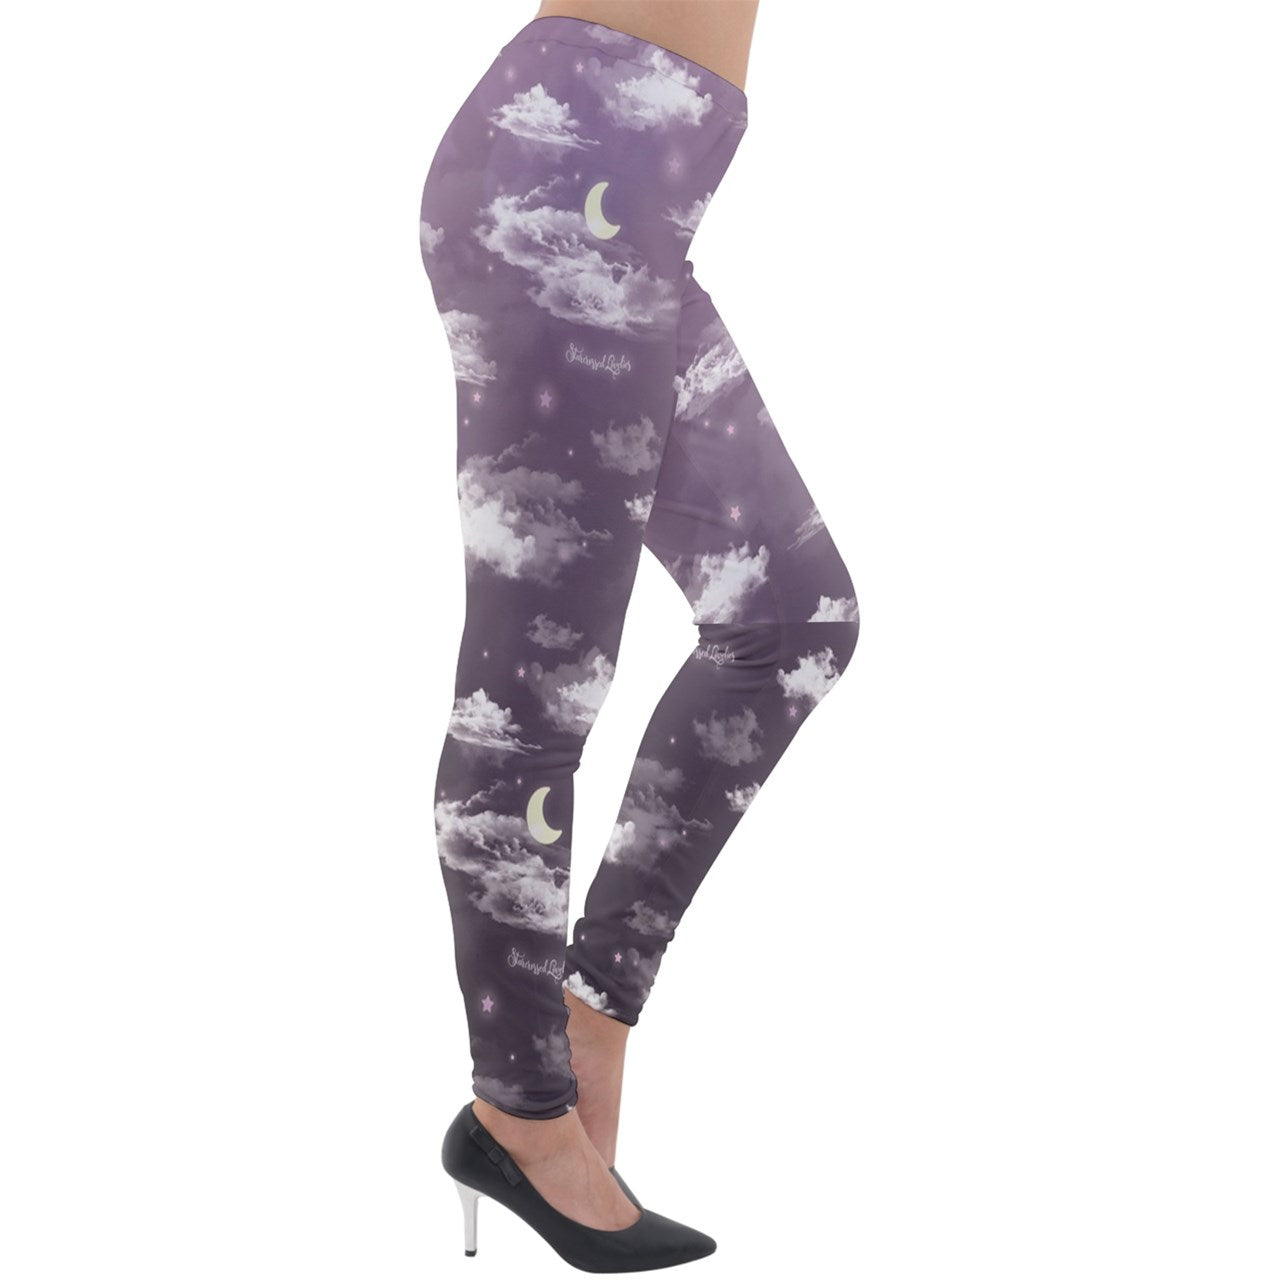 Dreamy Slumber Party Leggings in After Dark - Lolita Collective